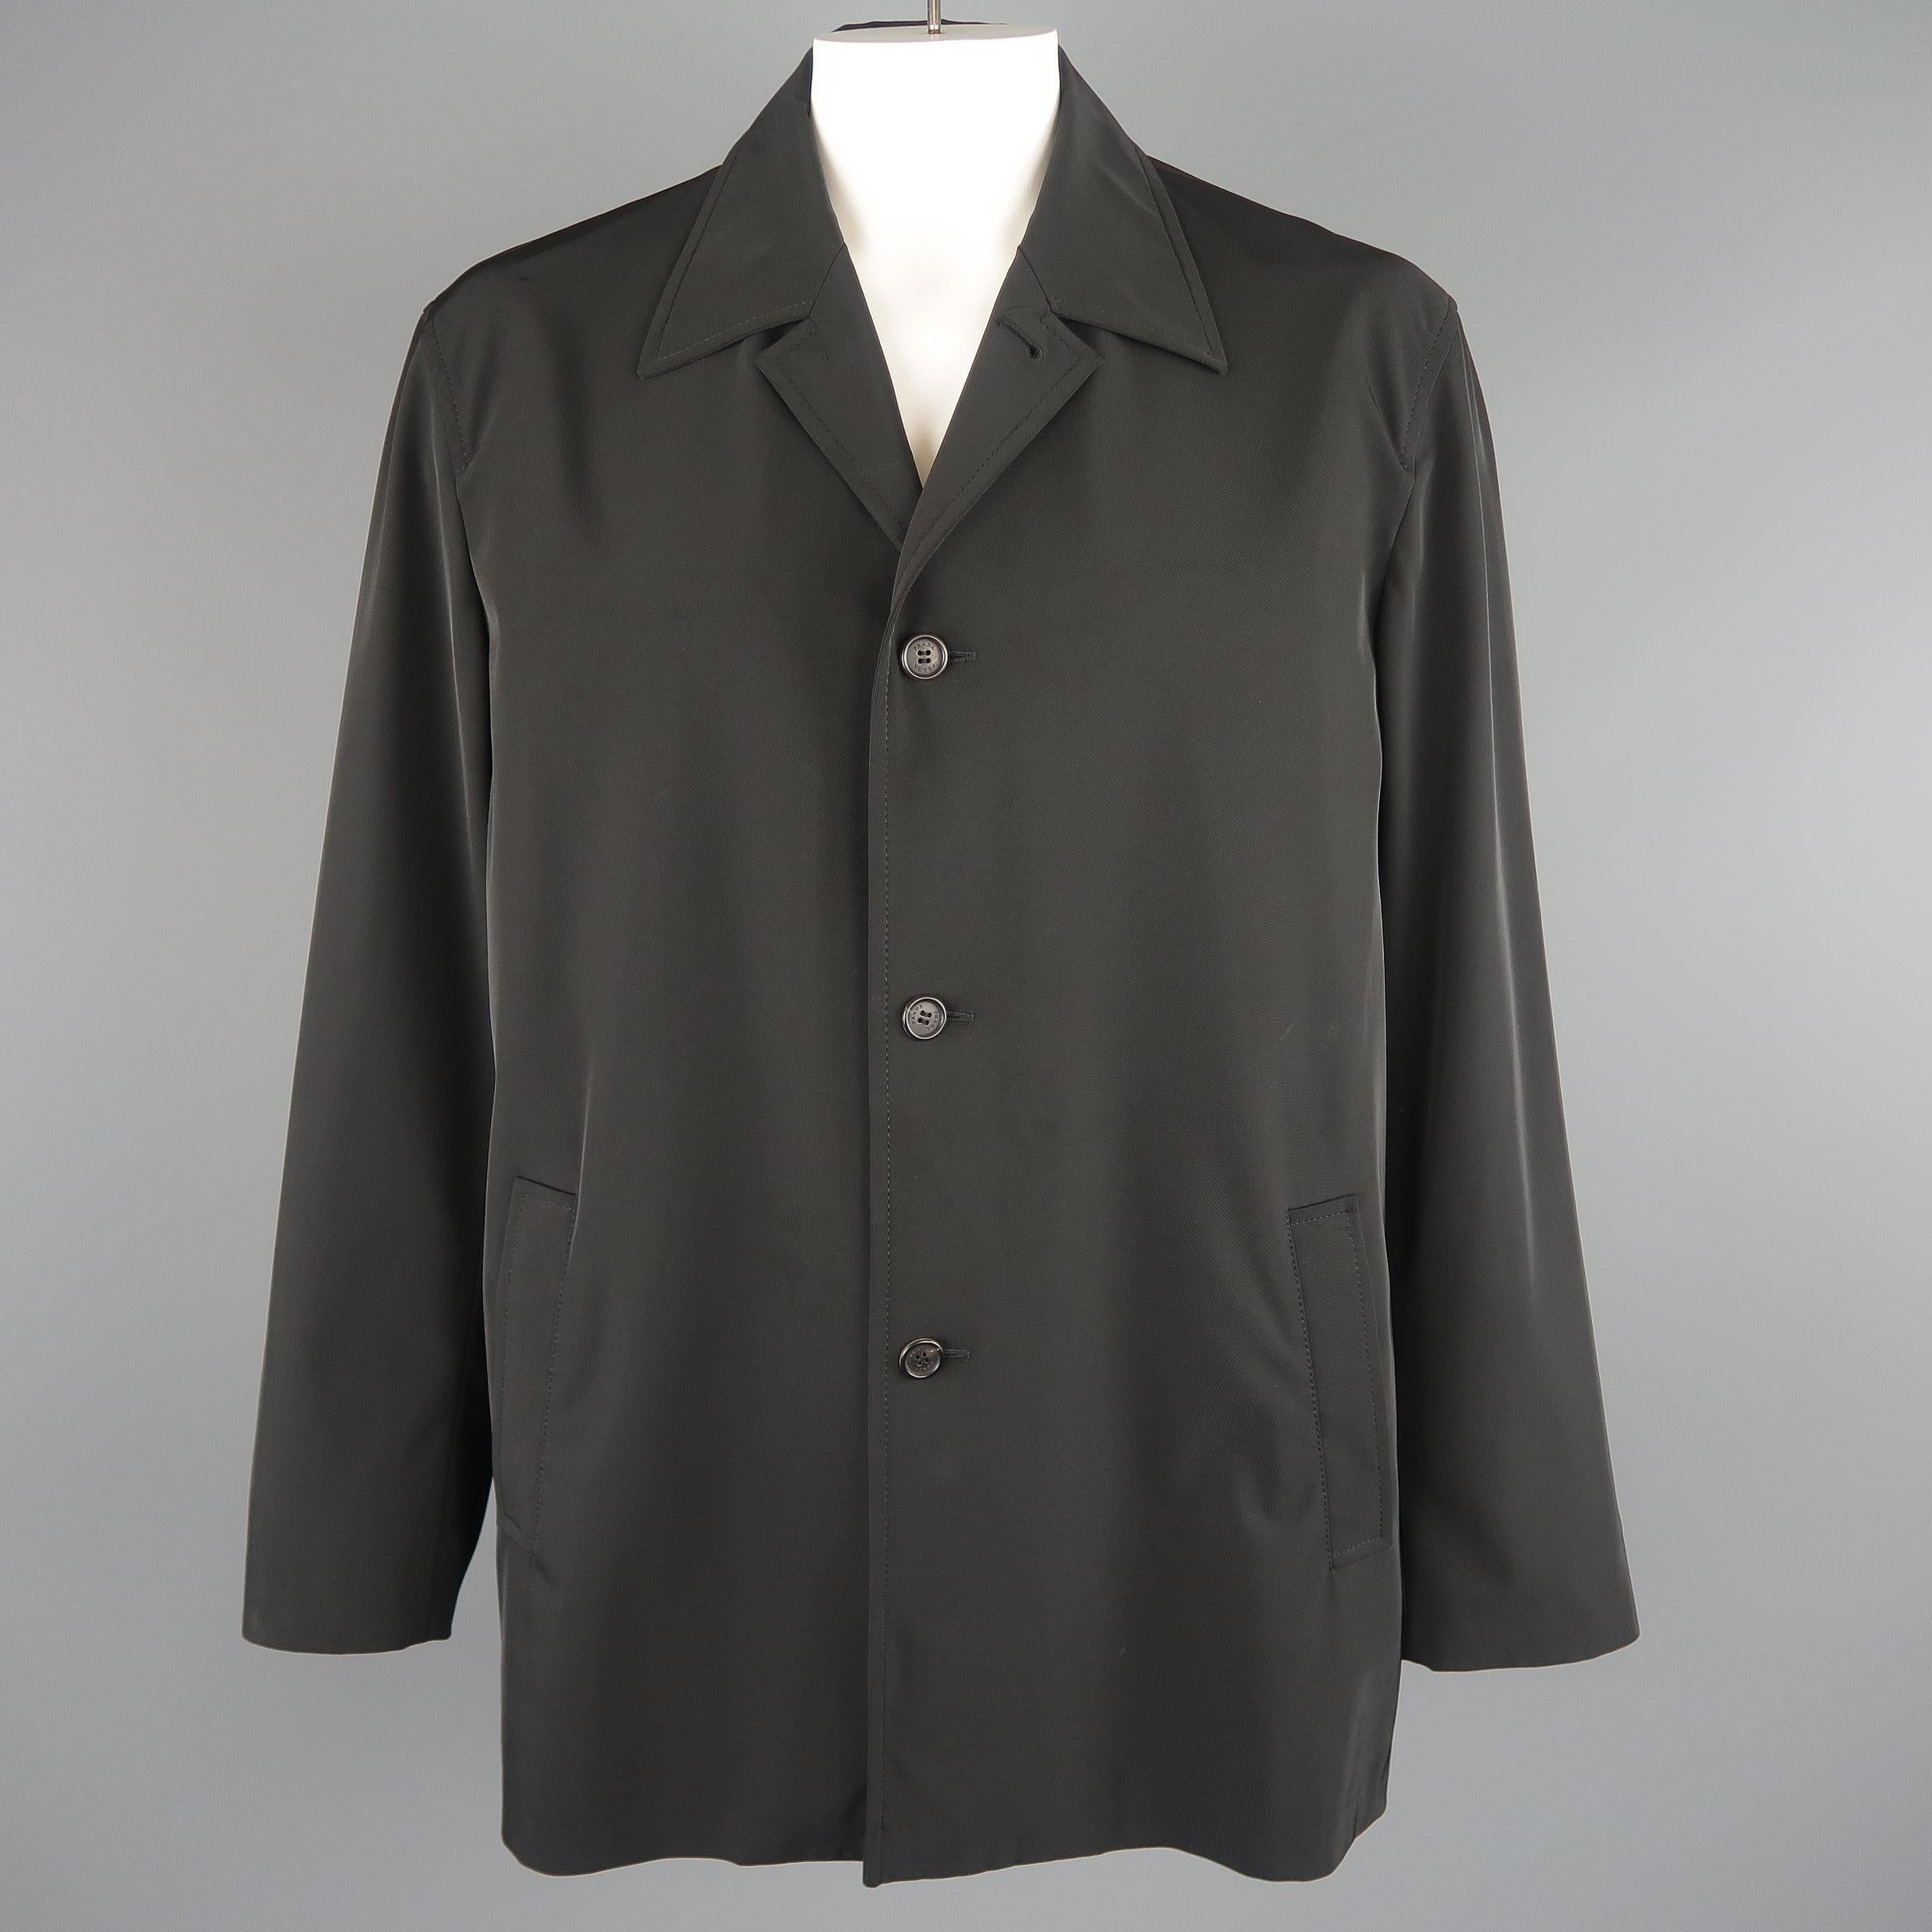 Prada overcoat comes in black polyester blend twill with a pointed collar, button up front, slanted pockets, and button cuffs. Wear throughout. As-is. Made in Italy.
 
Fair Pre-Owned Condition.
Marked: XXL
 
Measurements:
 
Shoulder: 20 in.
Chest: